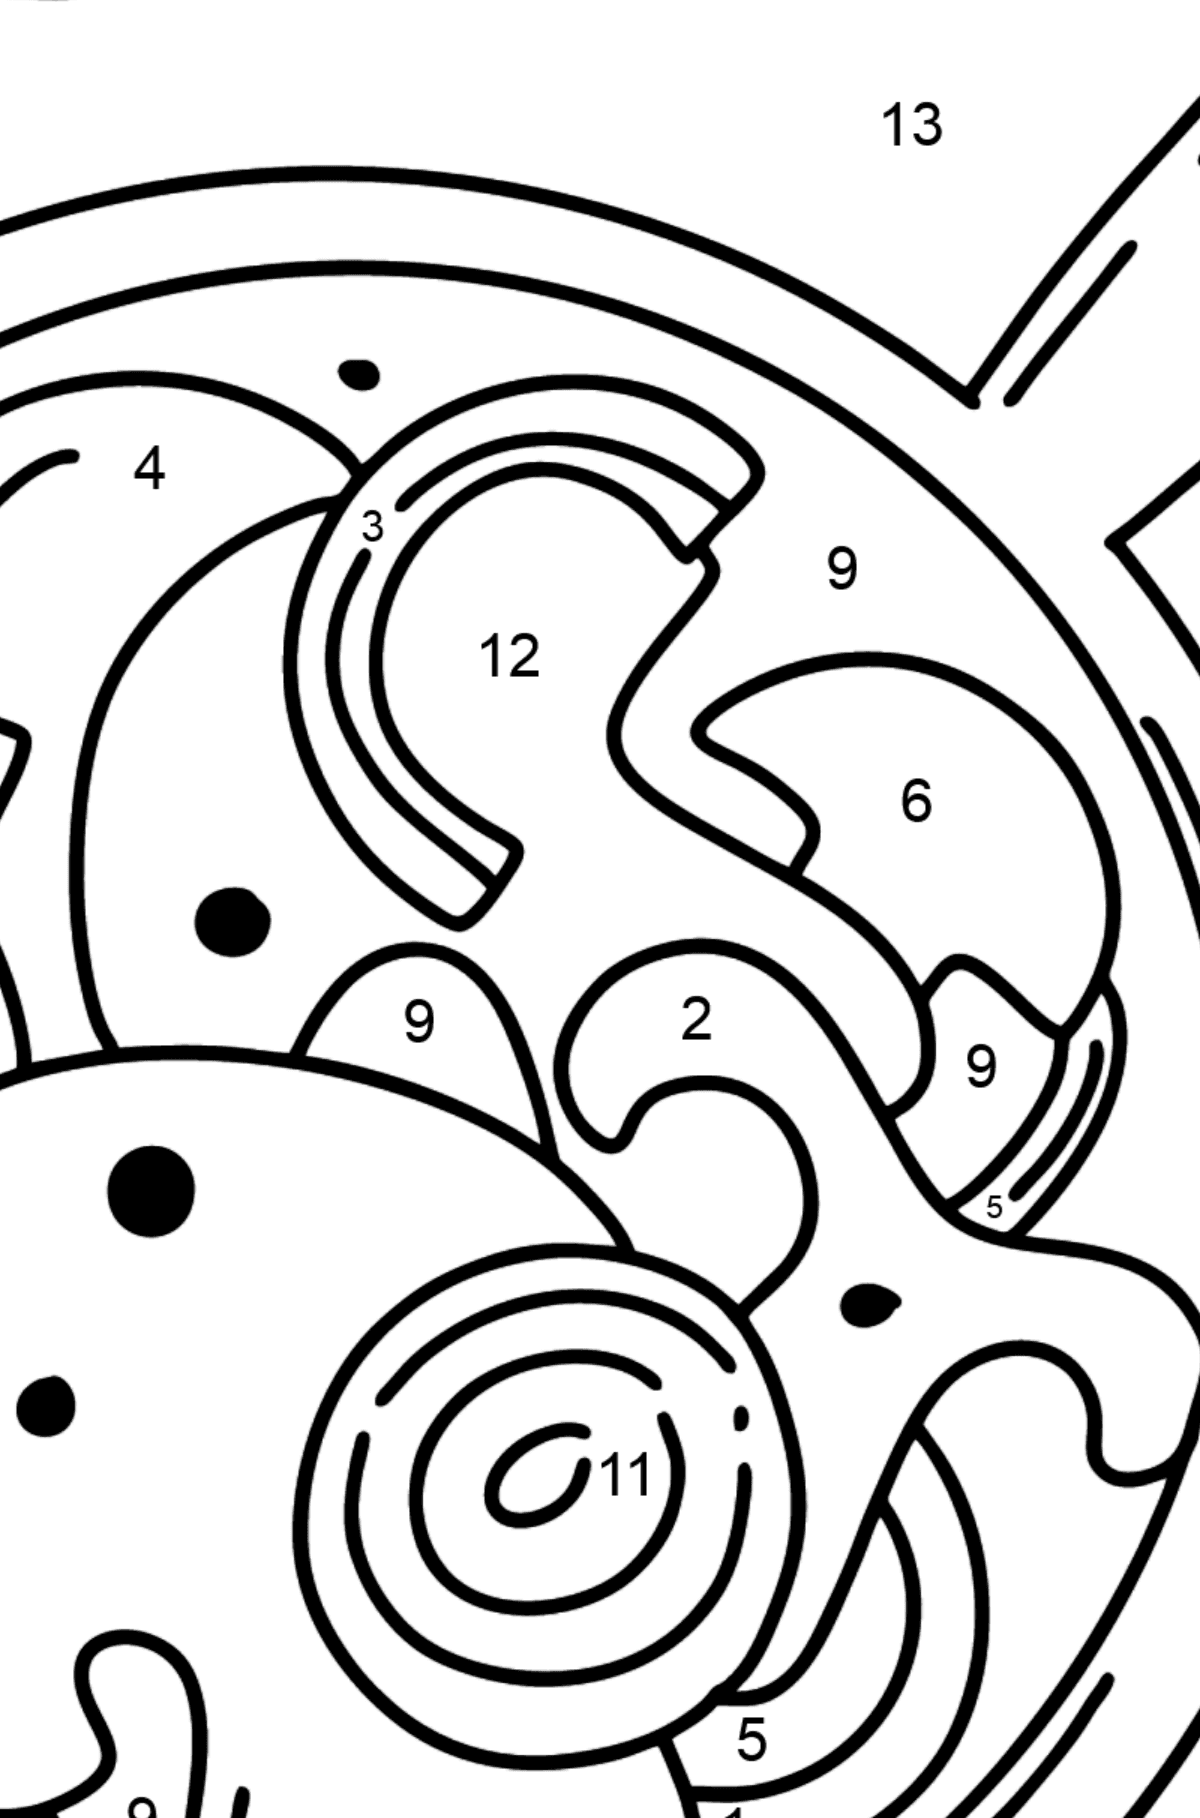 Mushrooms in Creamy Sauce coloring page - Coloring by Numbers for Kids